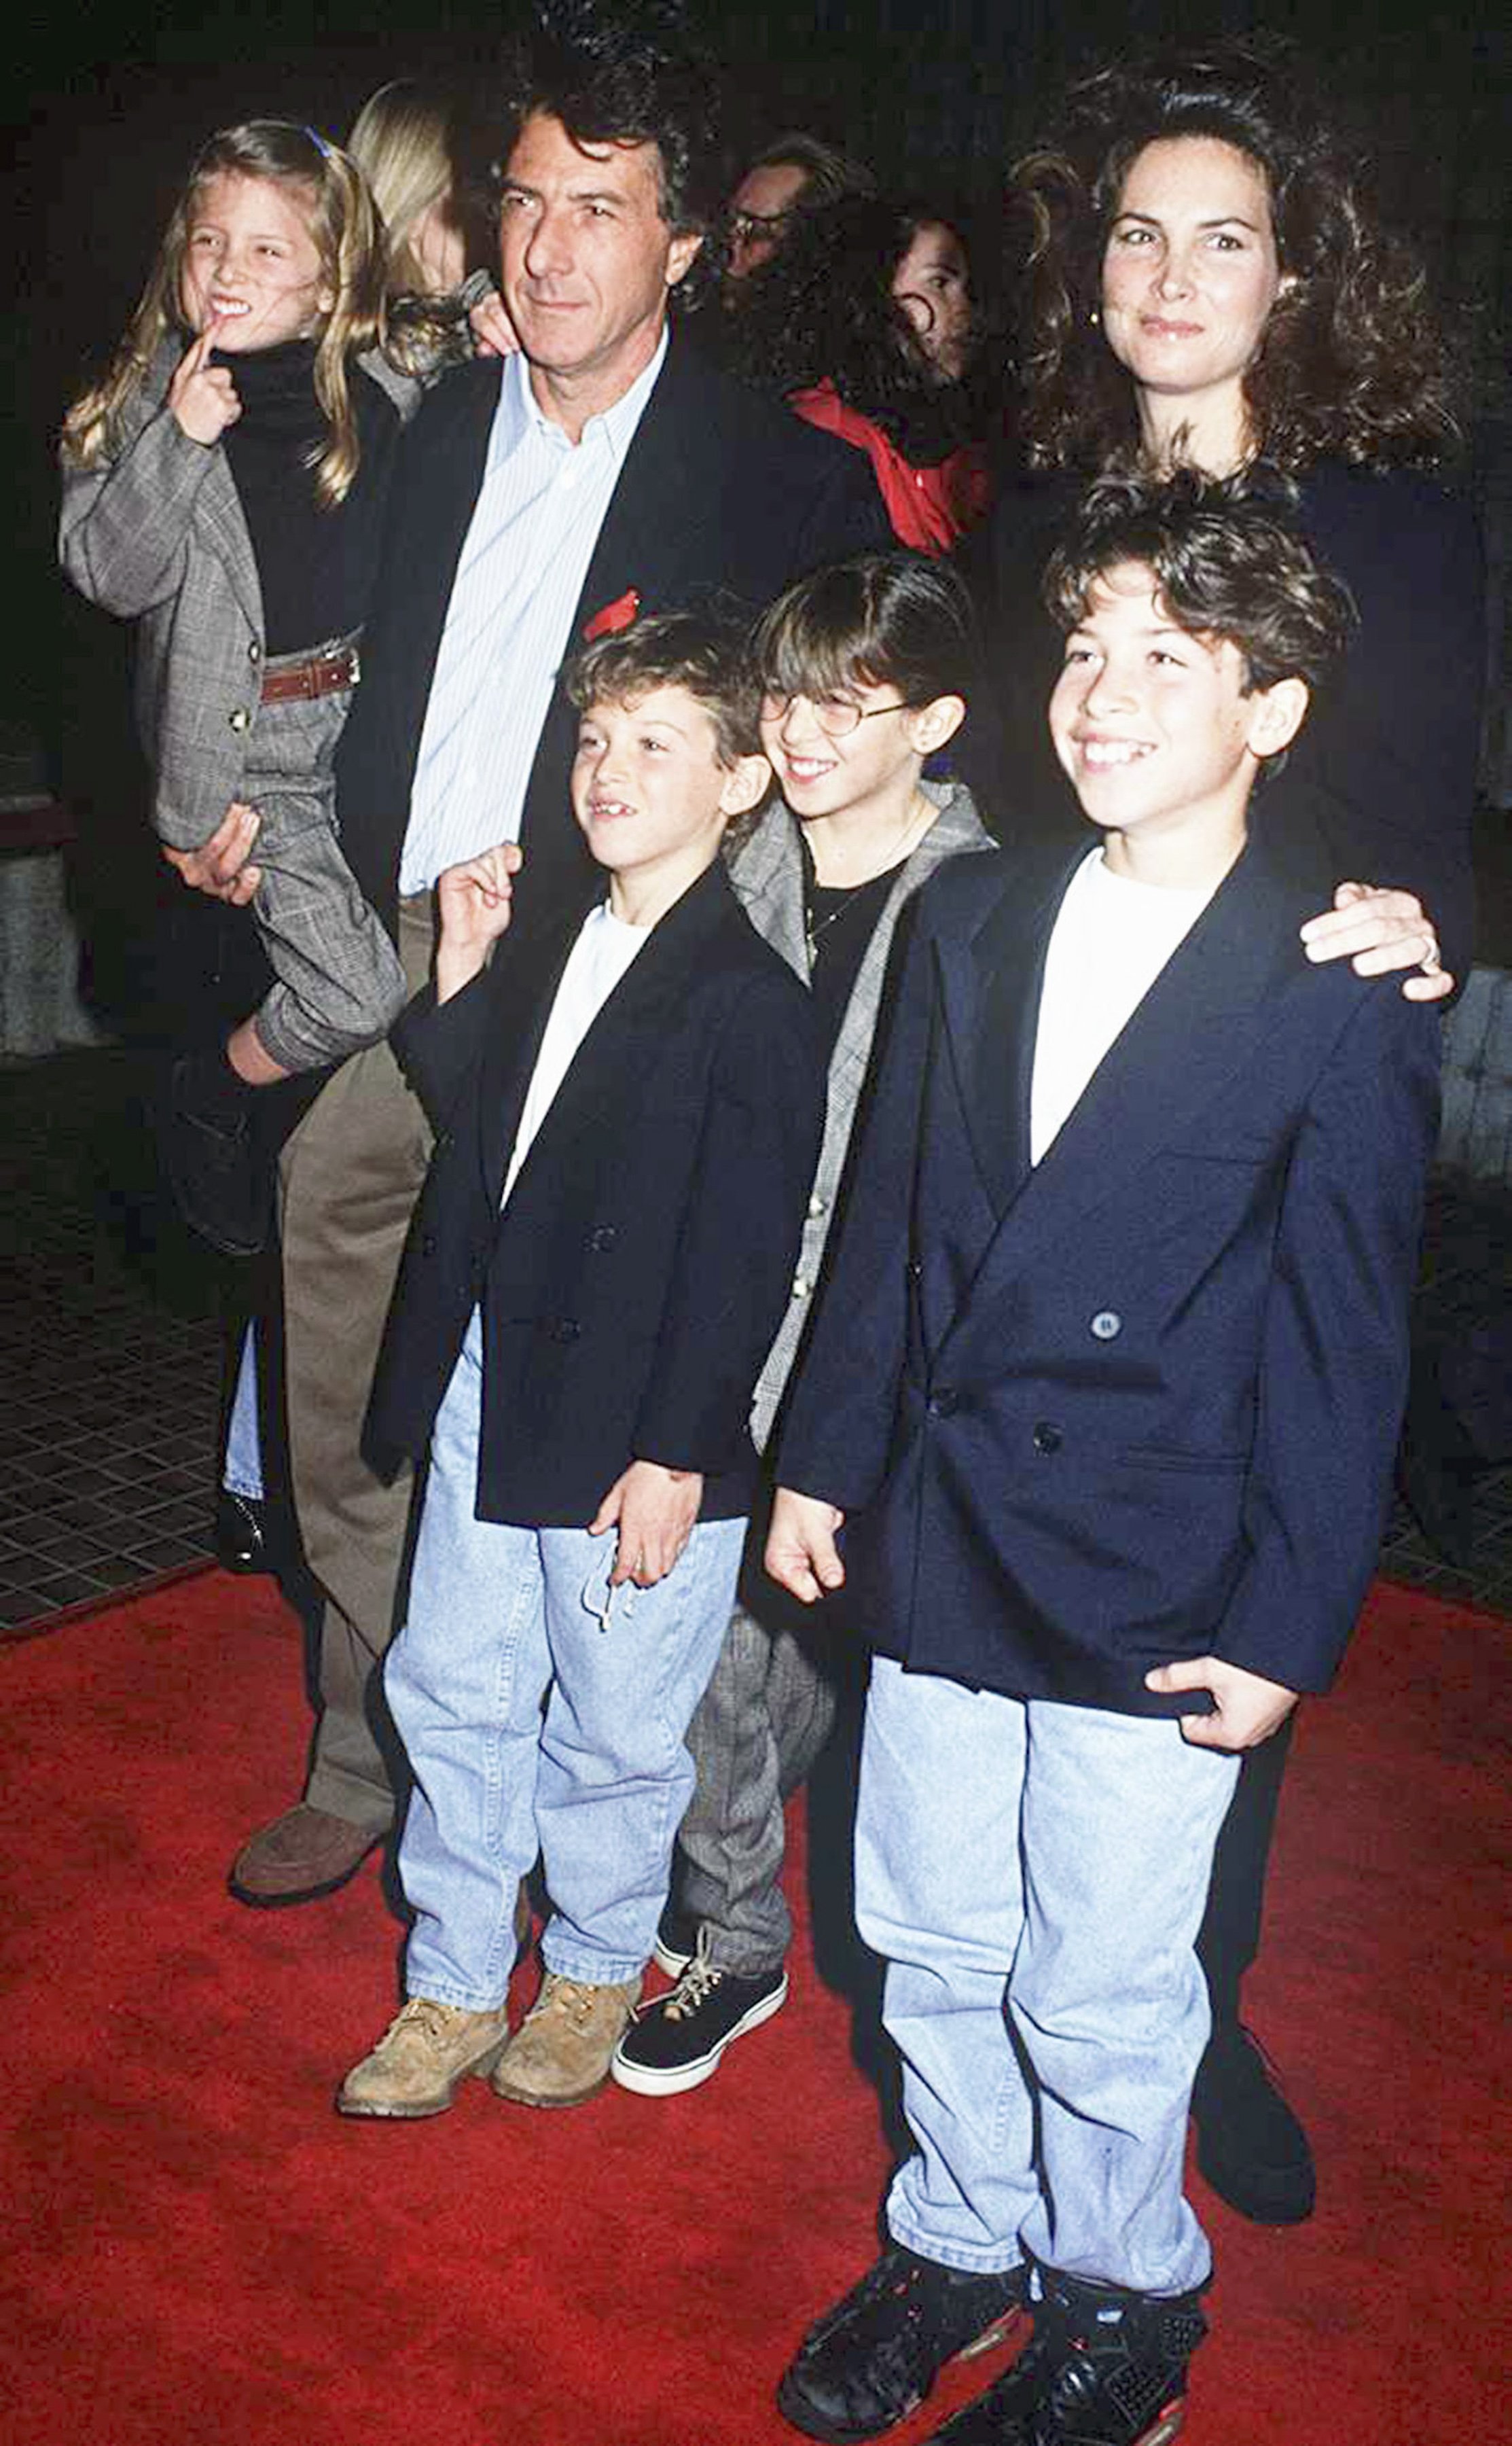 Dustin Hoffman with his wife, American businesswoman Lisa Hoffman and their children Jake Hoffman, Rebecca Hoffman, Max Hoffman, and Alexandra Hoffman attend a red carpet event, circa 1991. | Source: Getty Images 